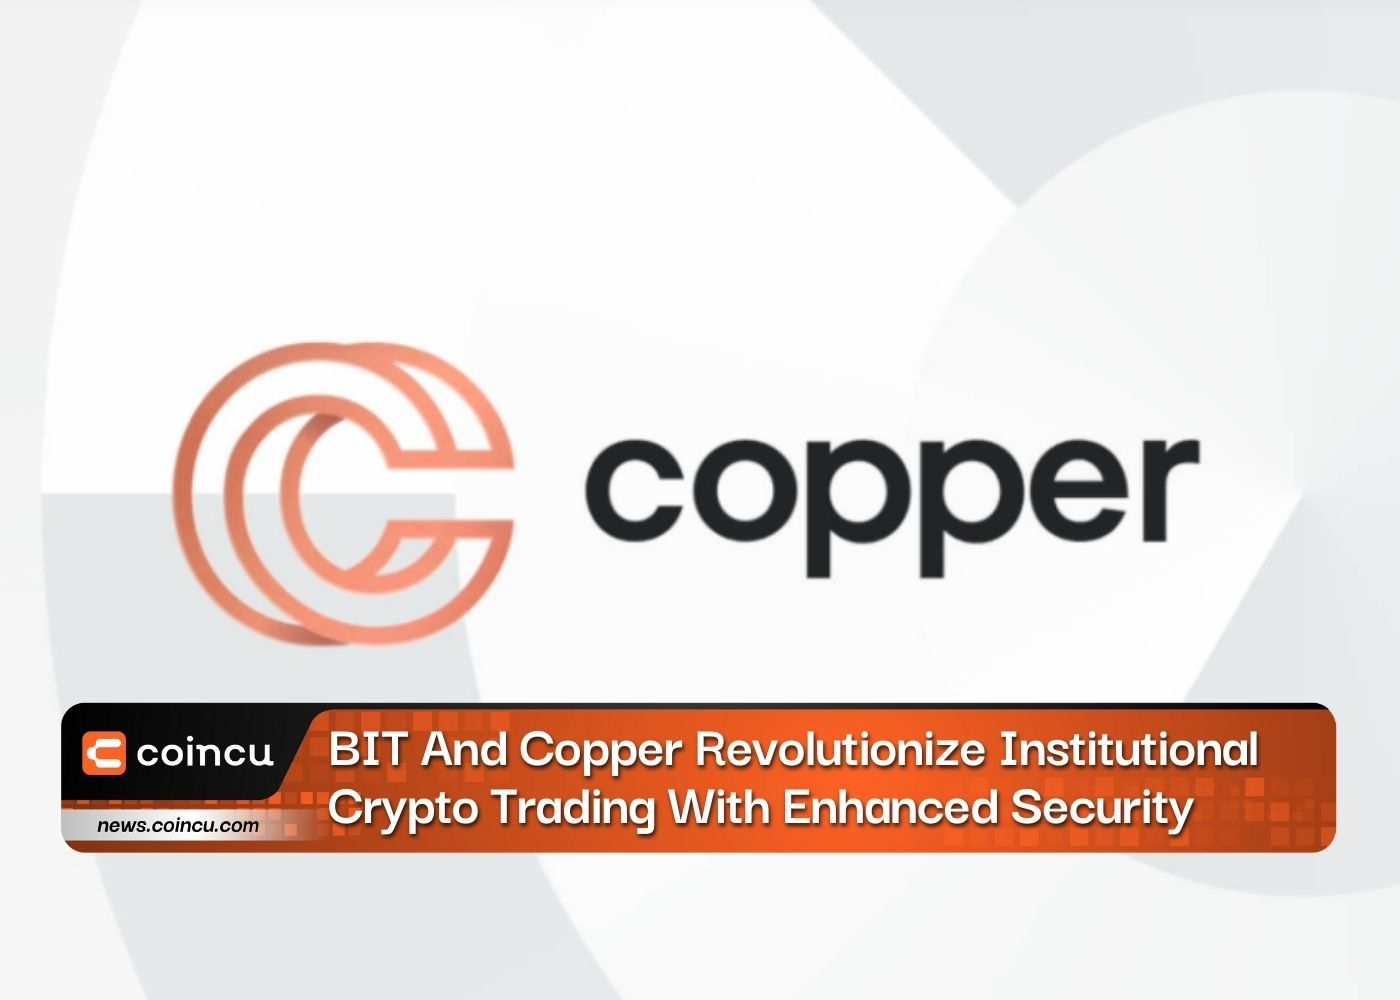 BIT And Copper Revolutionize Institutional Crypto Trading With Enhanced Security